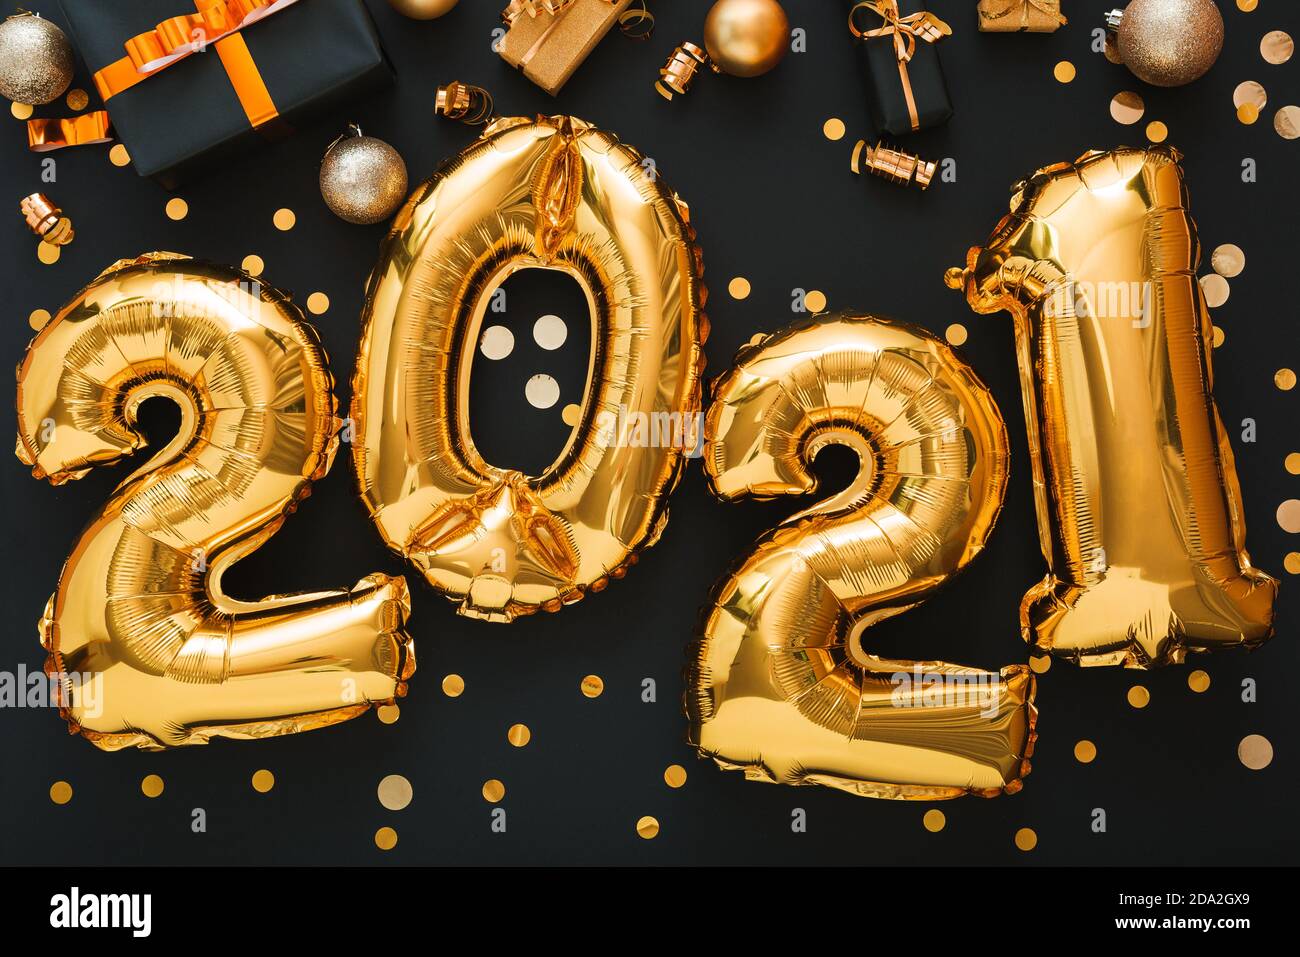 2021 balloon gold text on black background with golden confetti, Christmas gift boxes festive decor. Happy New year eve composition with gold foil bal Stock Photo